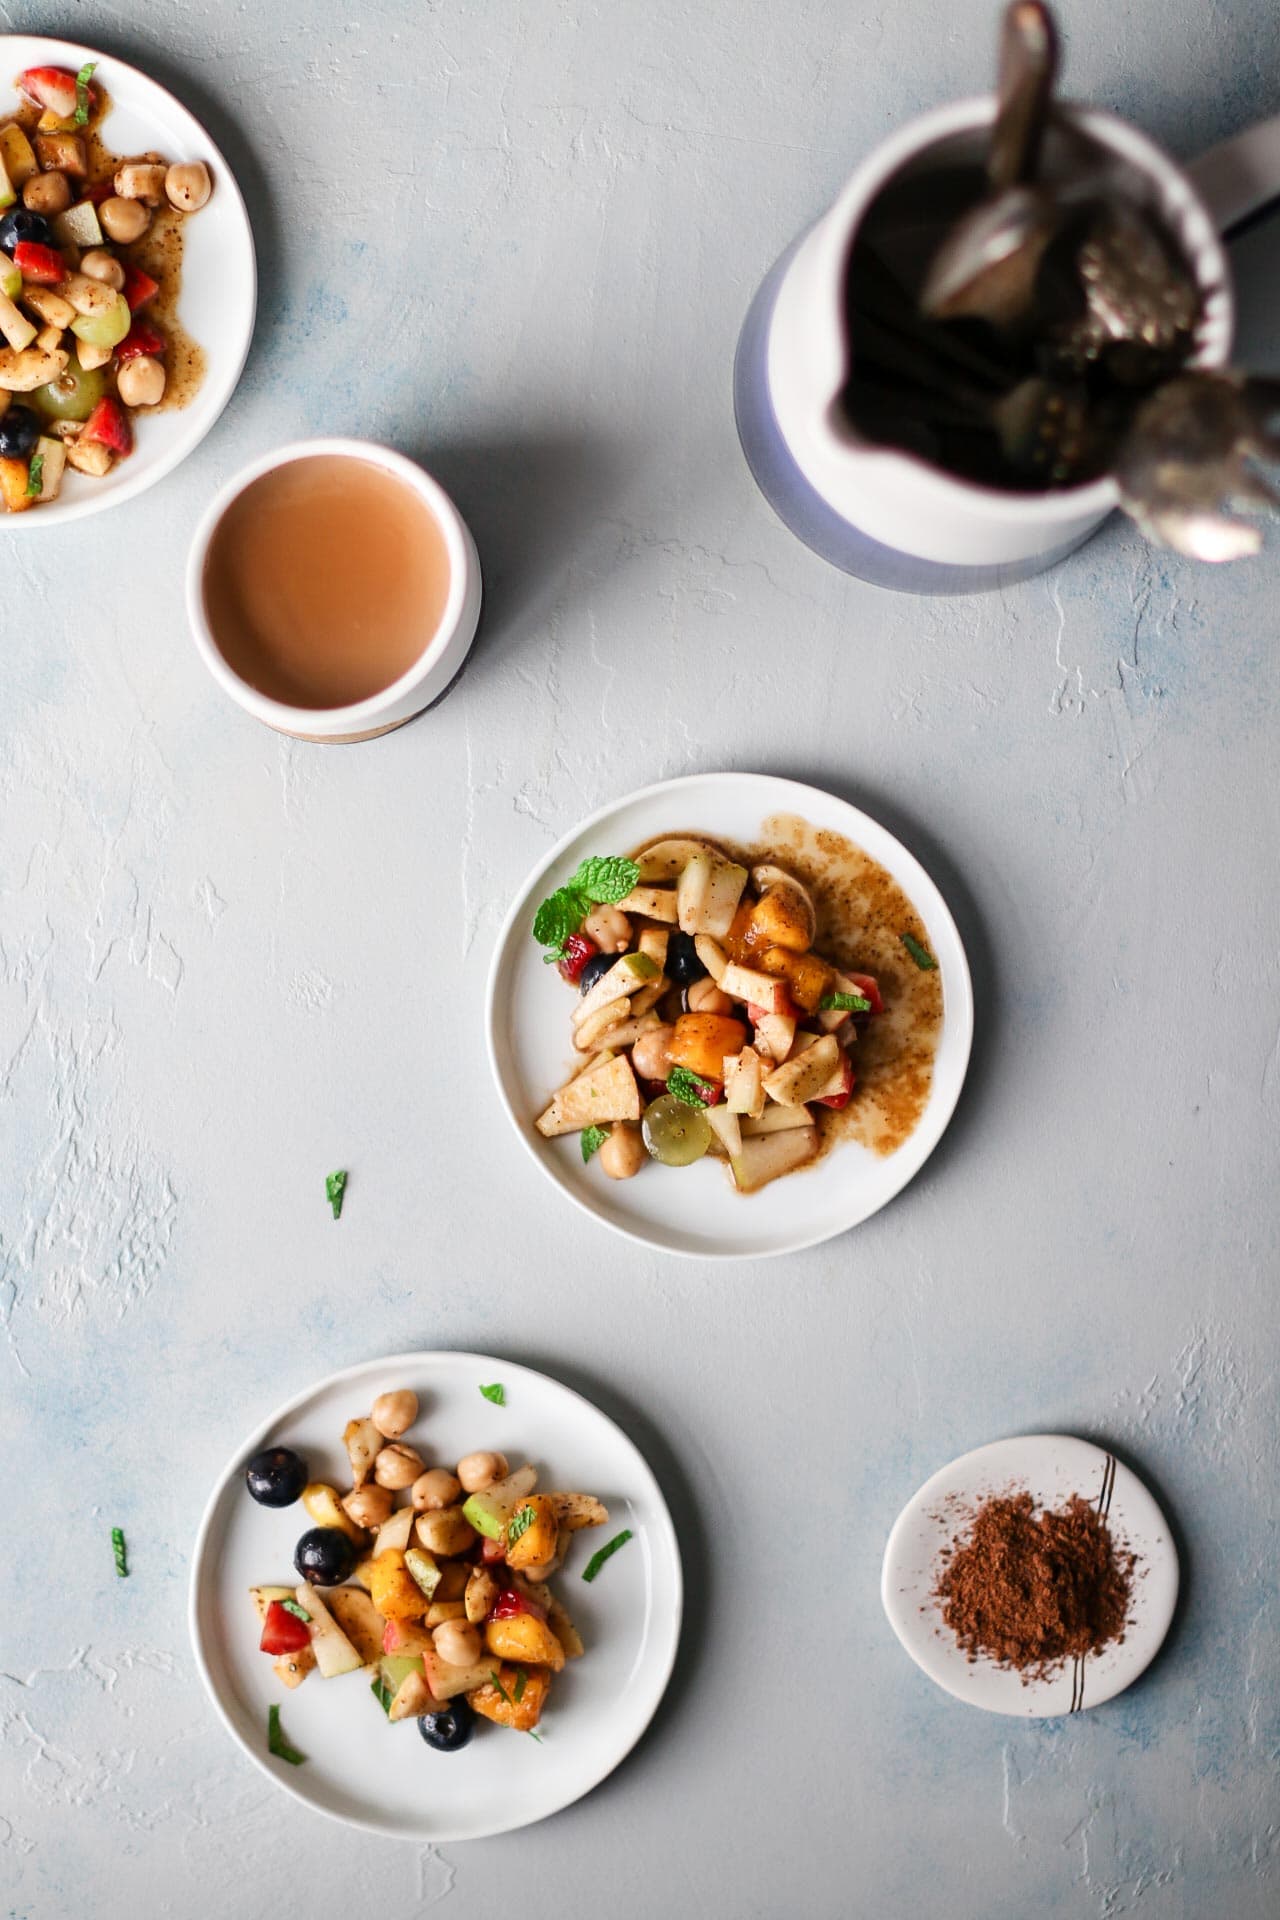 Plates of fruit chaat and a side of chaat masala